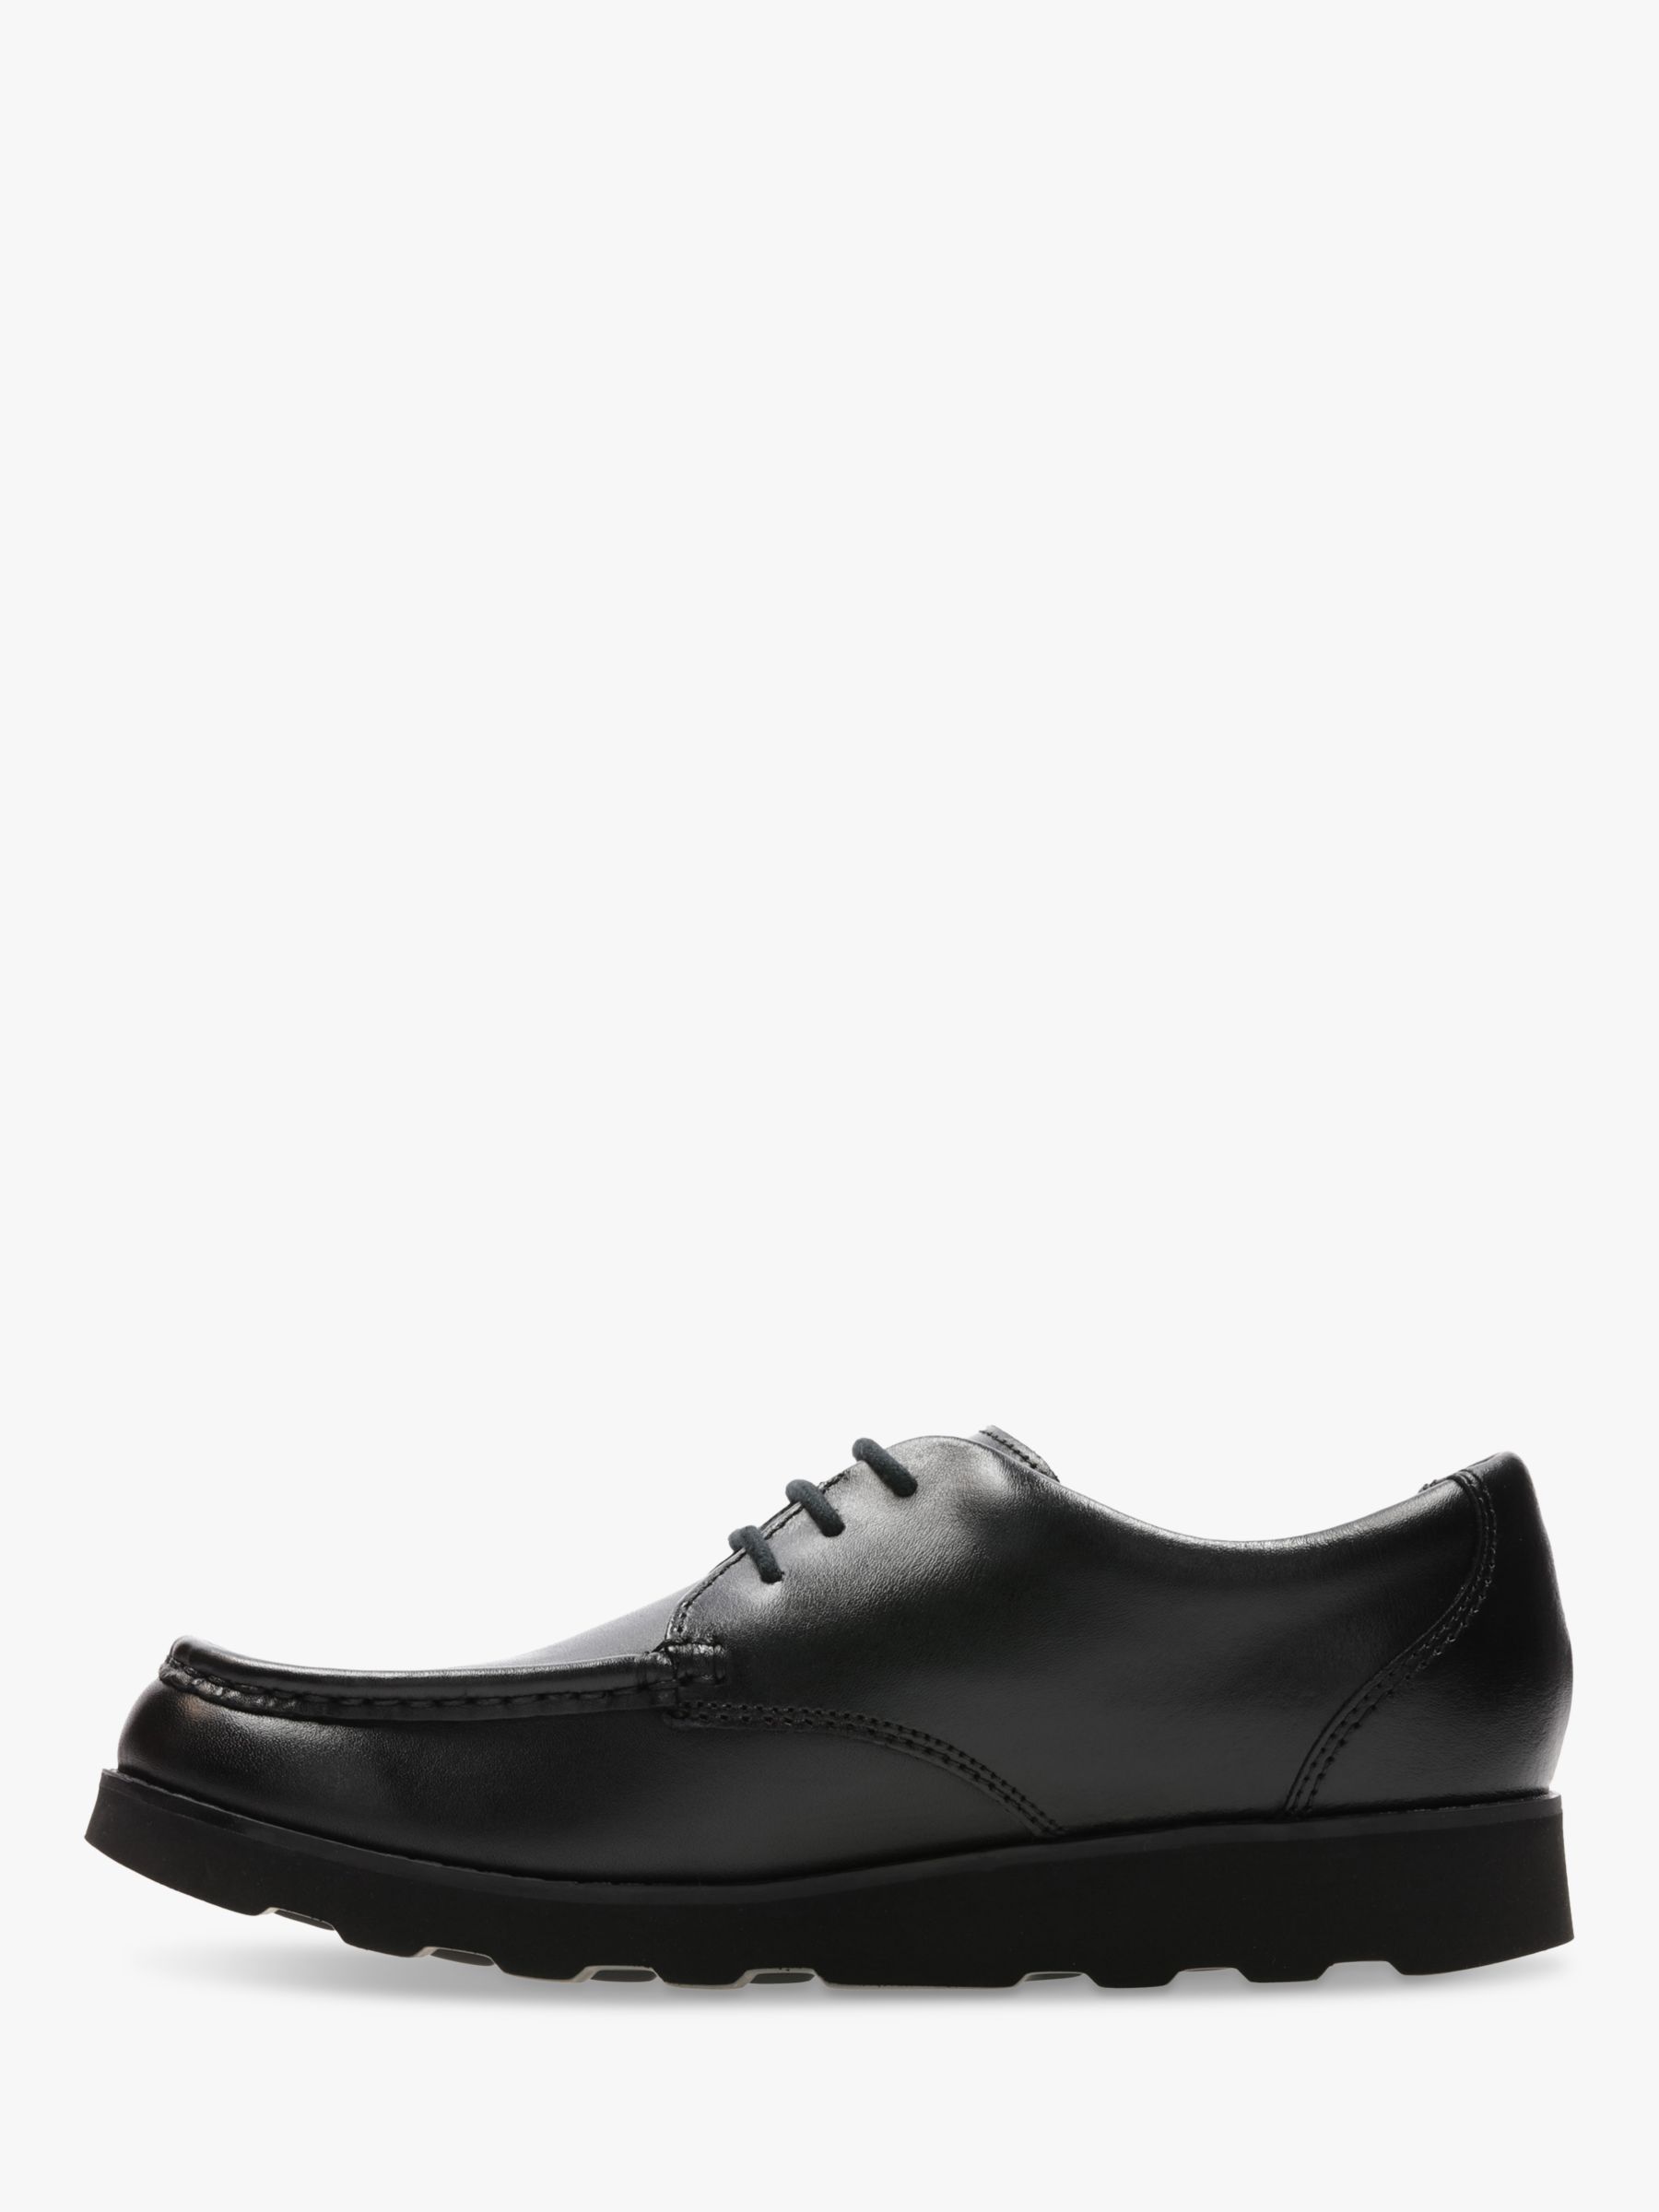 Clarks Children's Crown Tate Leather Shoes, Black